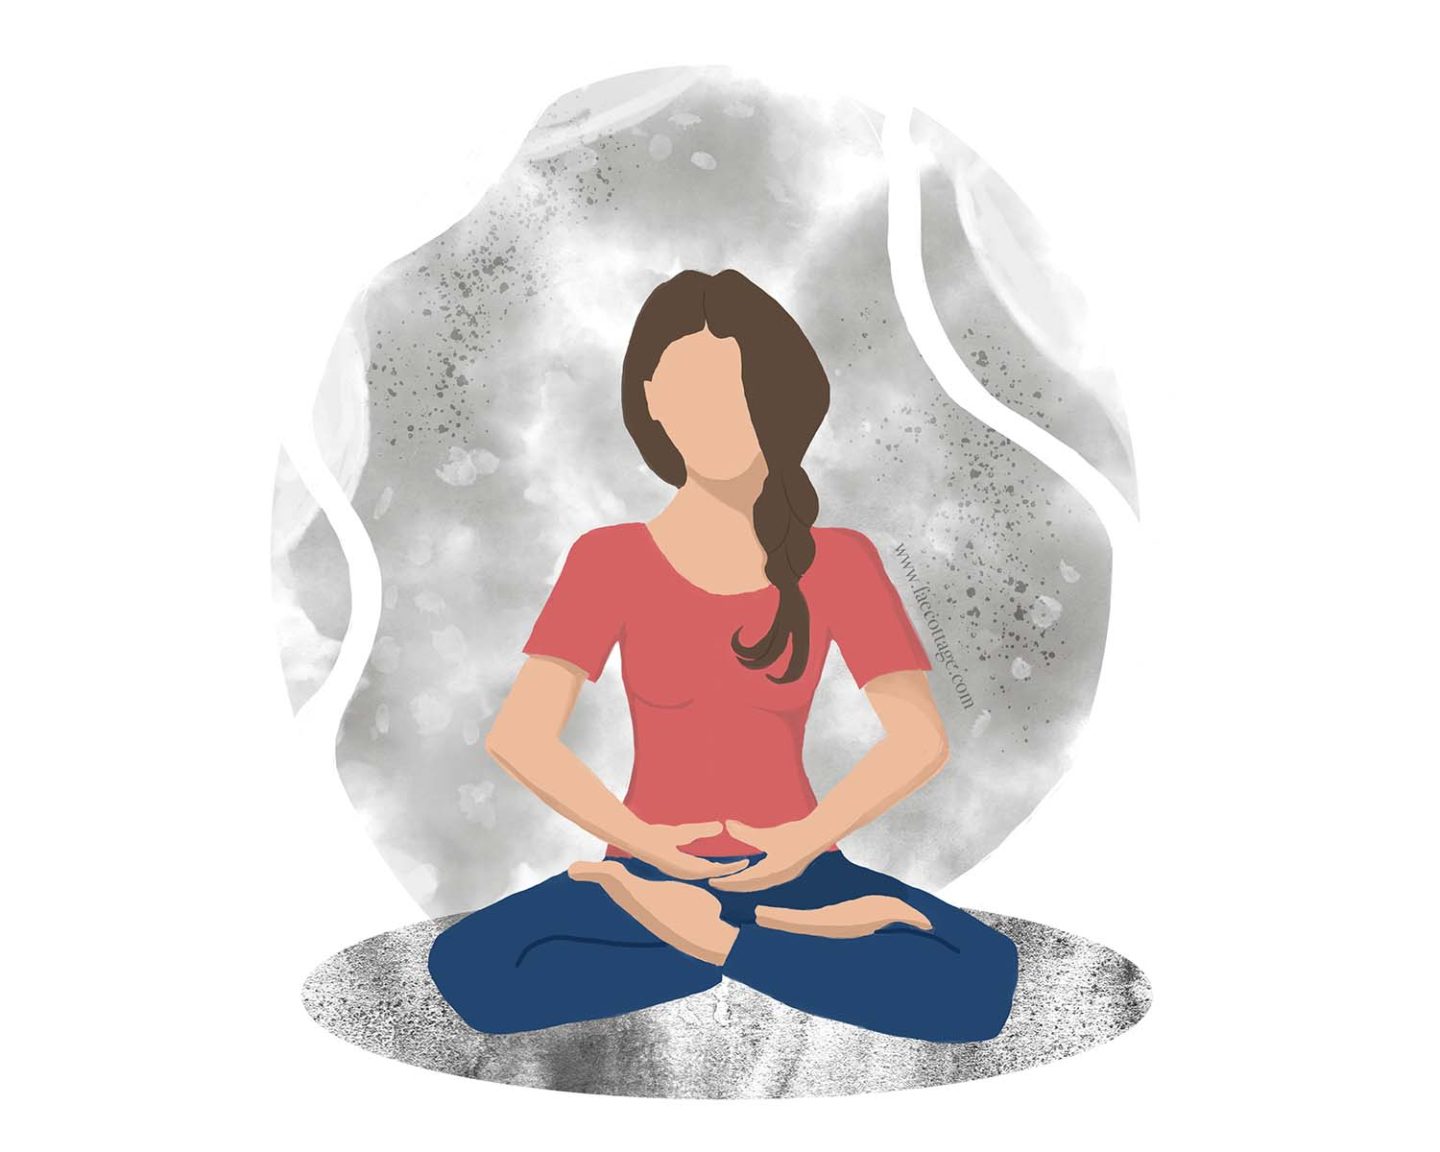 meditation for relaxation